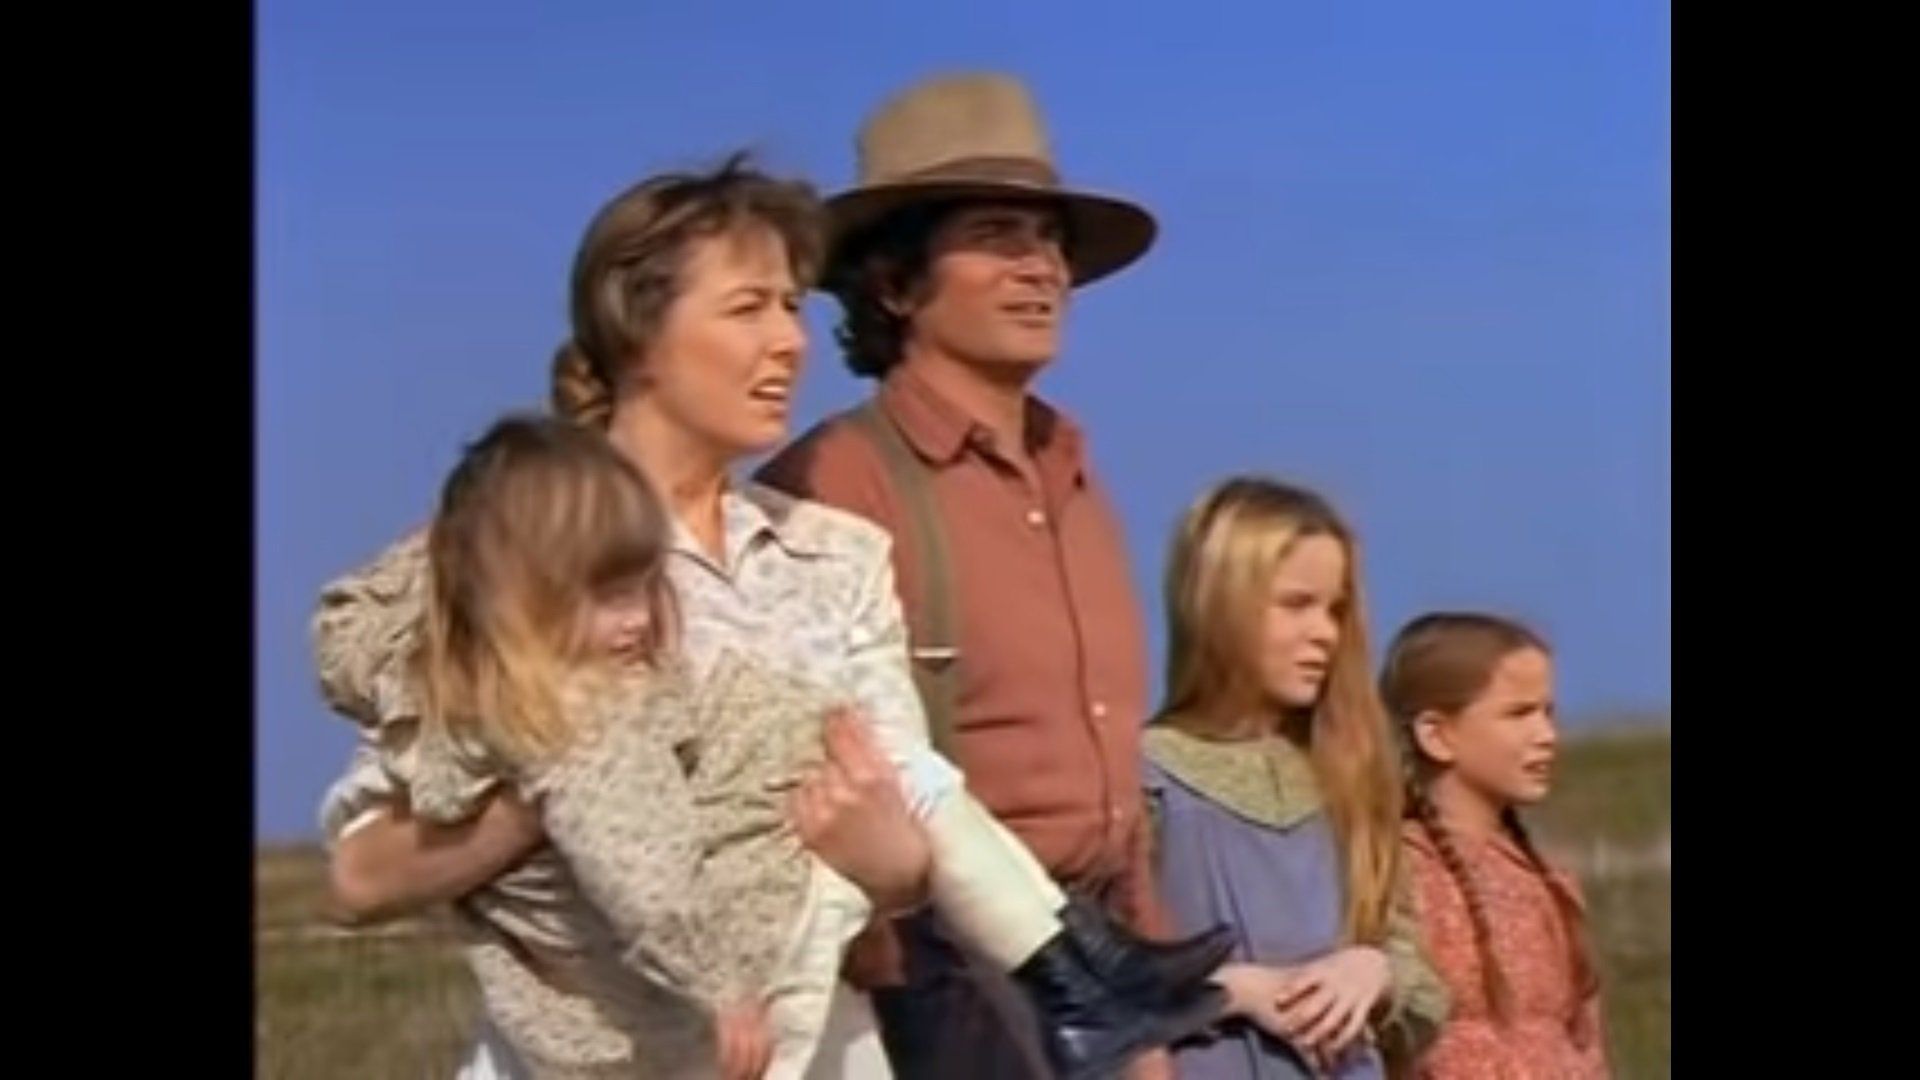 All 9 Seasons Of ‘Little House On The Prairie’ Are Now On Amazon Prime